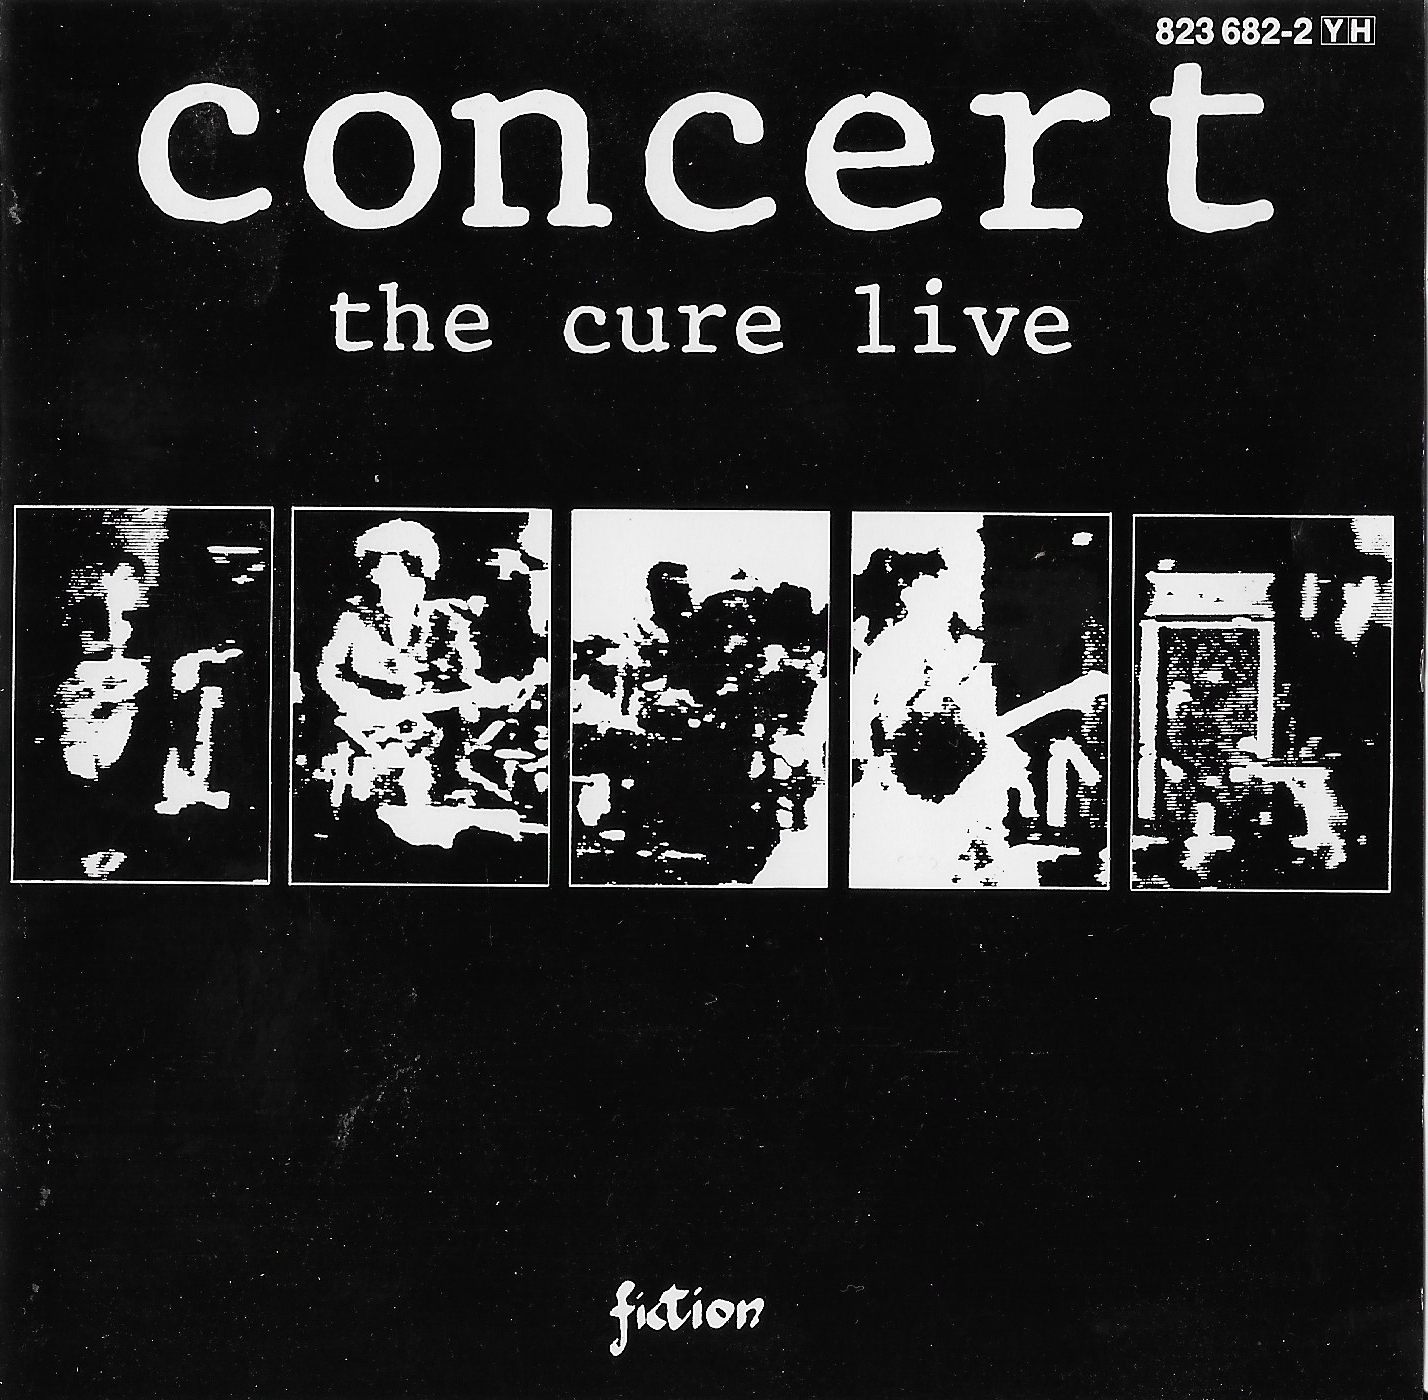 Picture of Concert - The Cure live by artist The Cure 